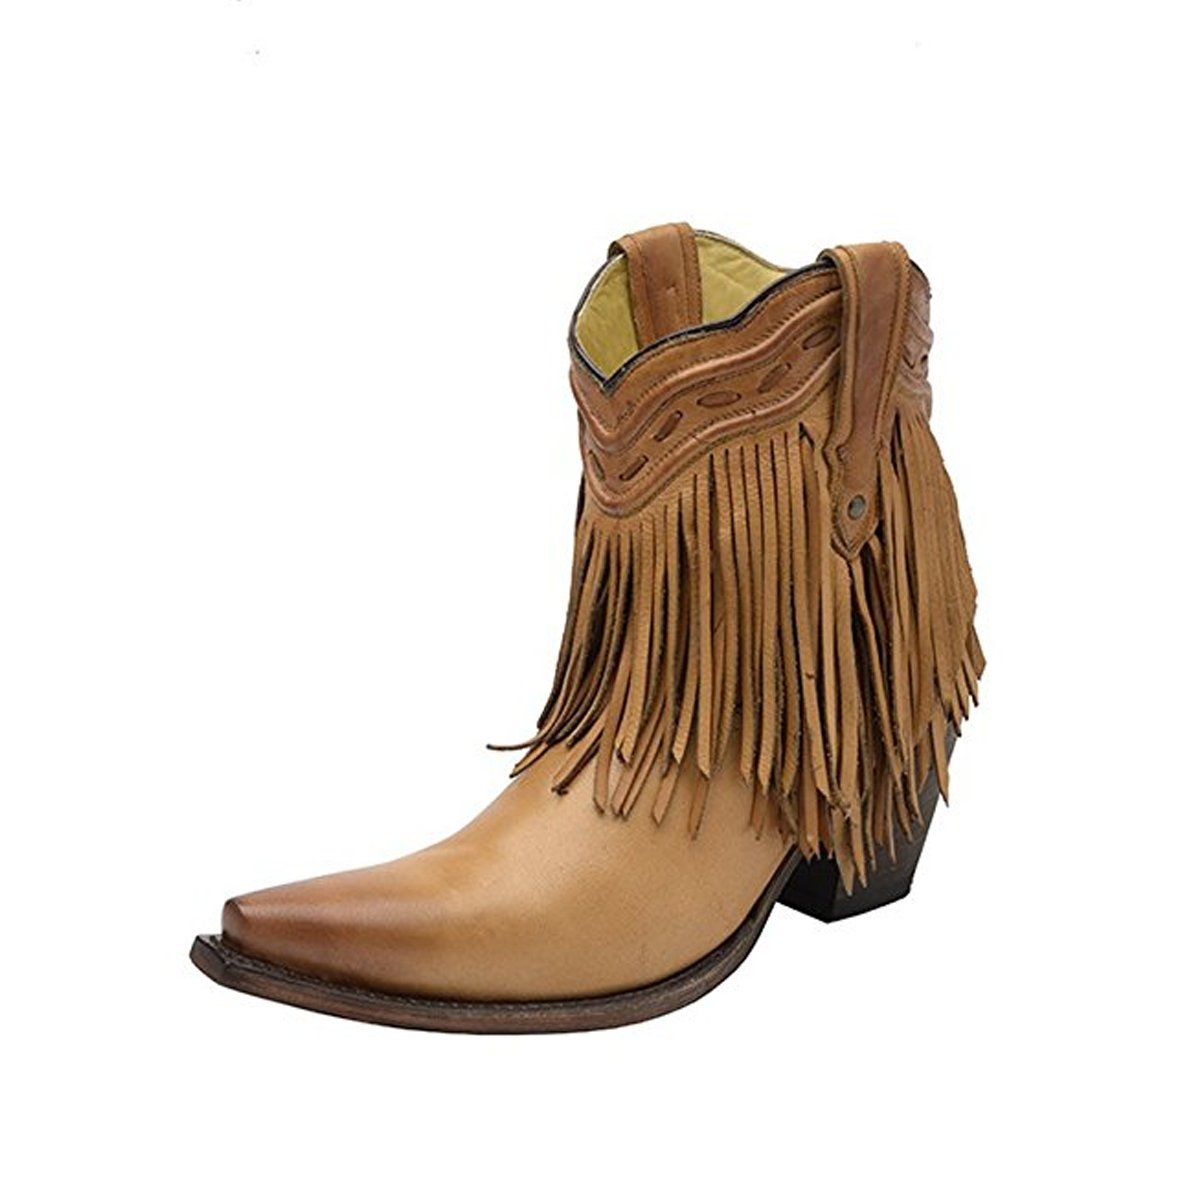 Corral Women's Tan Fringe and Whip Stitch Short Snip Toe Boot - G1207 ...